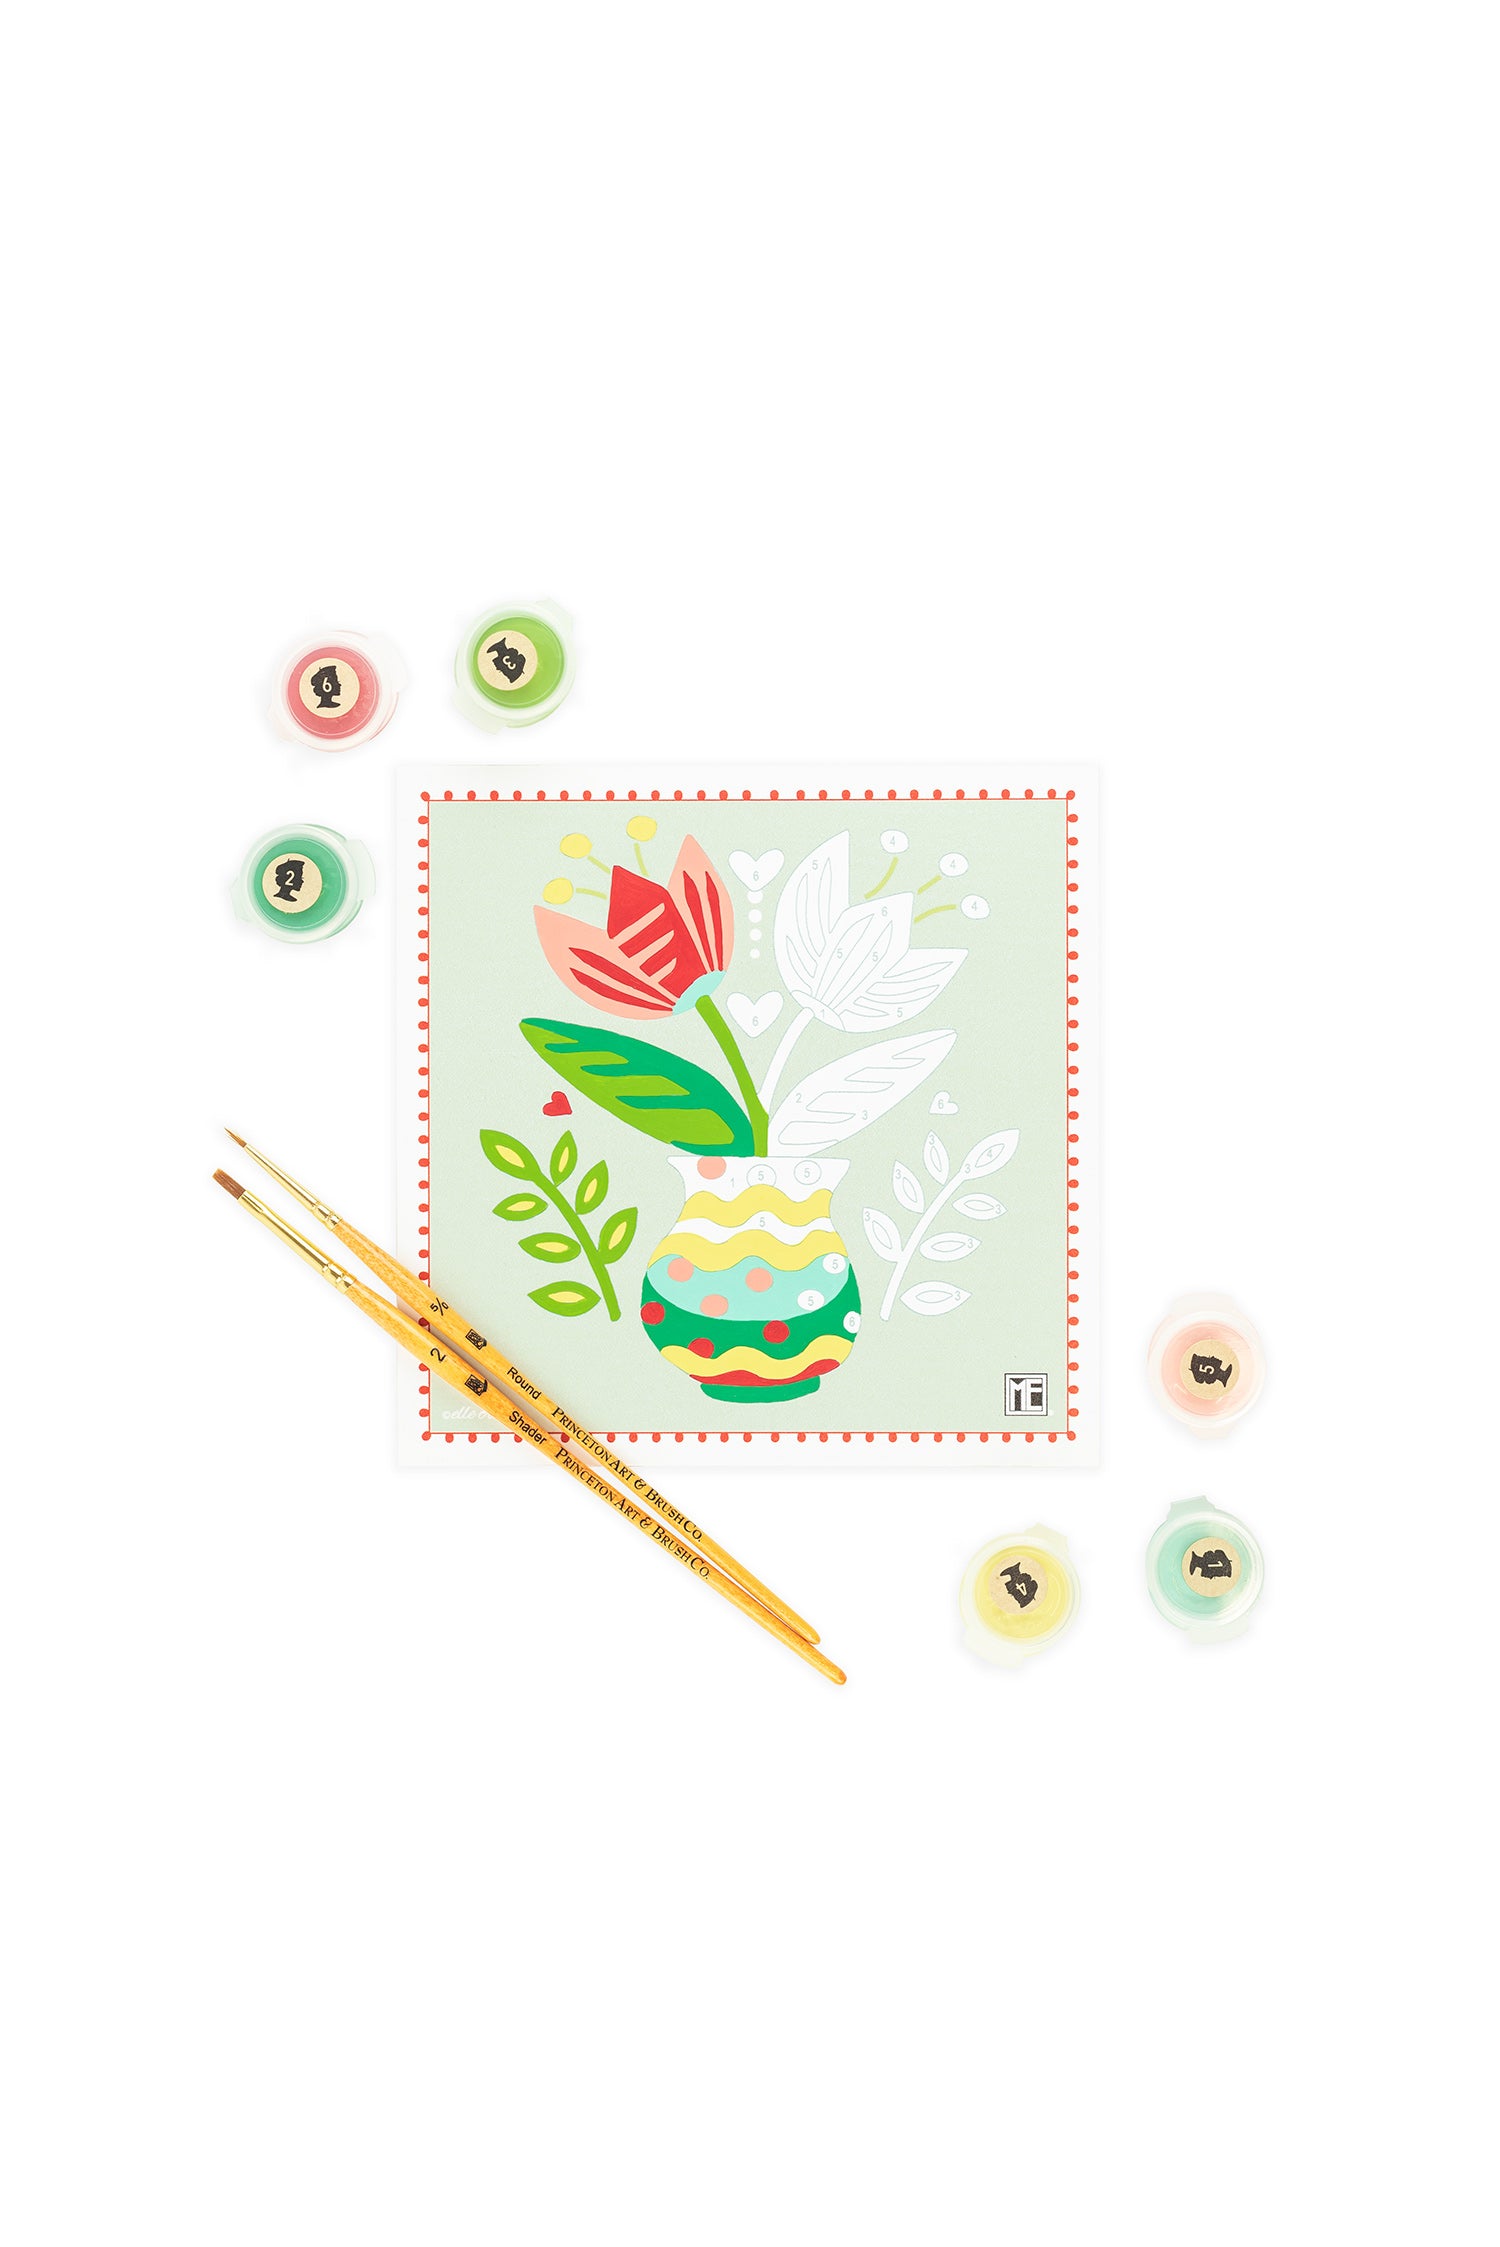 Breit Buds | Mary Engelbreit 6x6 paint-by-number kit - Elle Crée